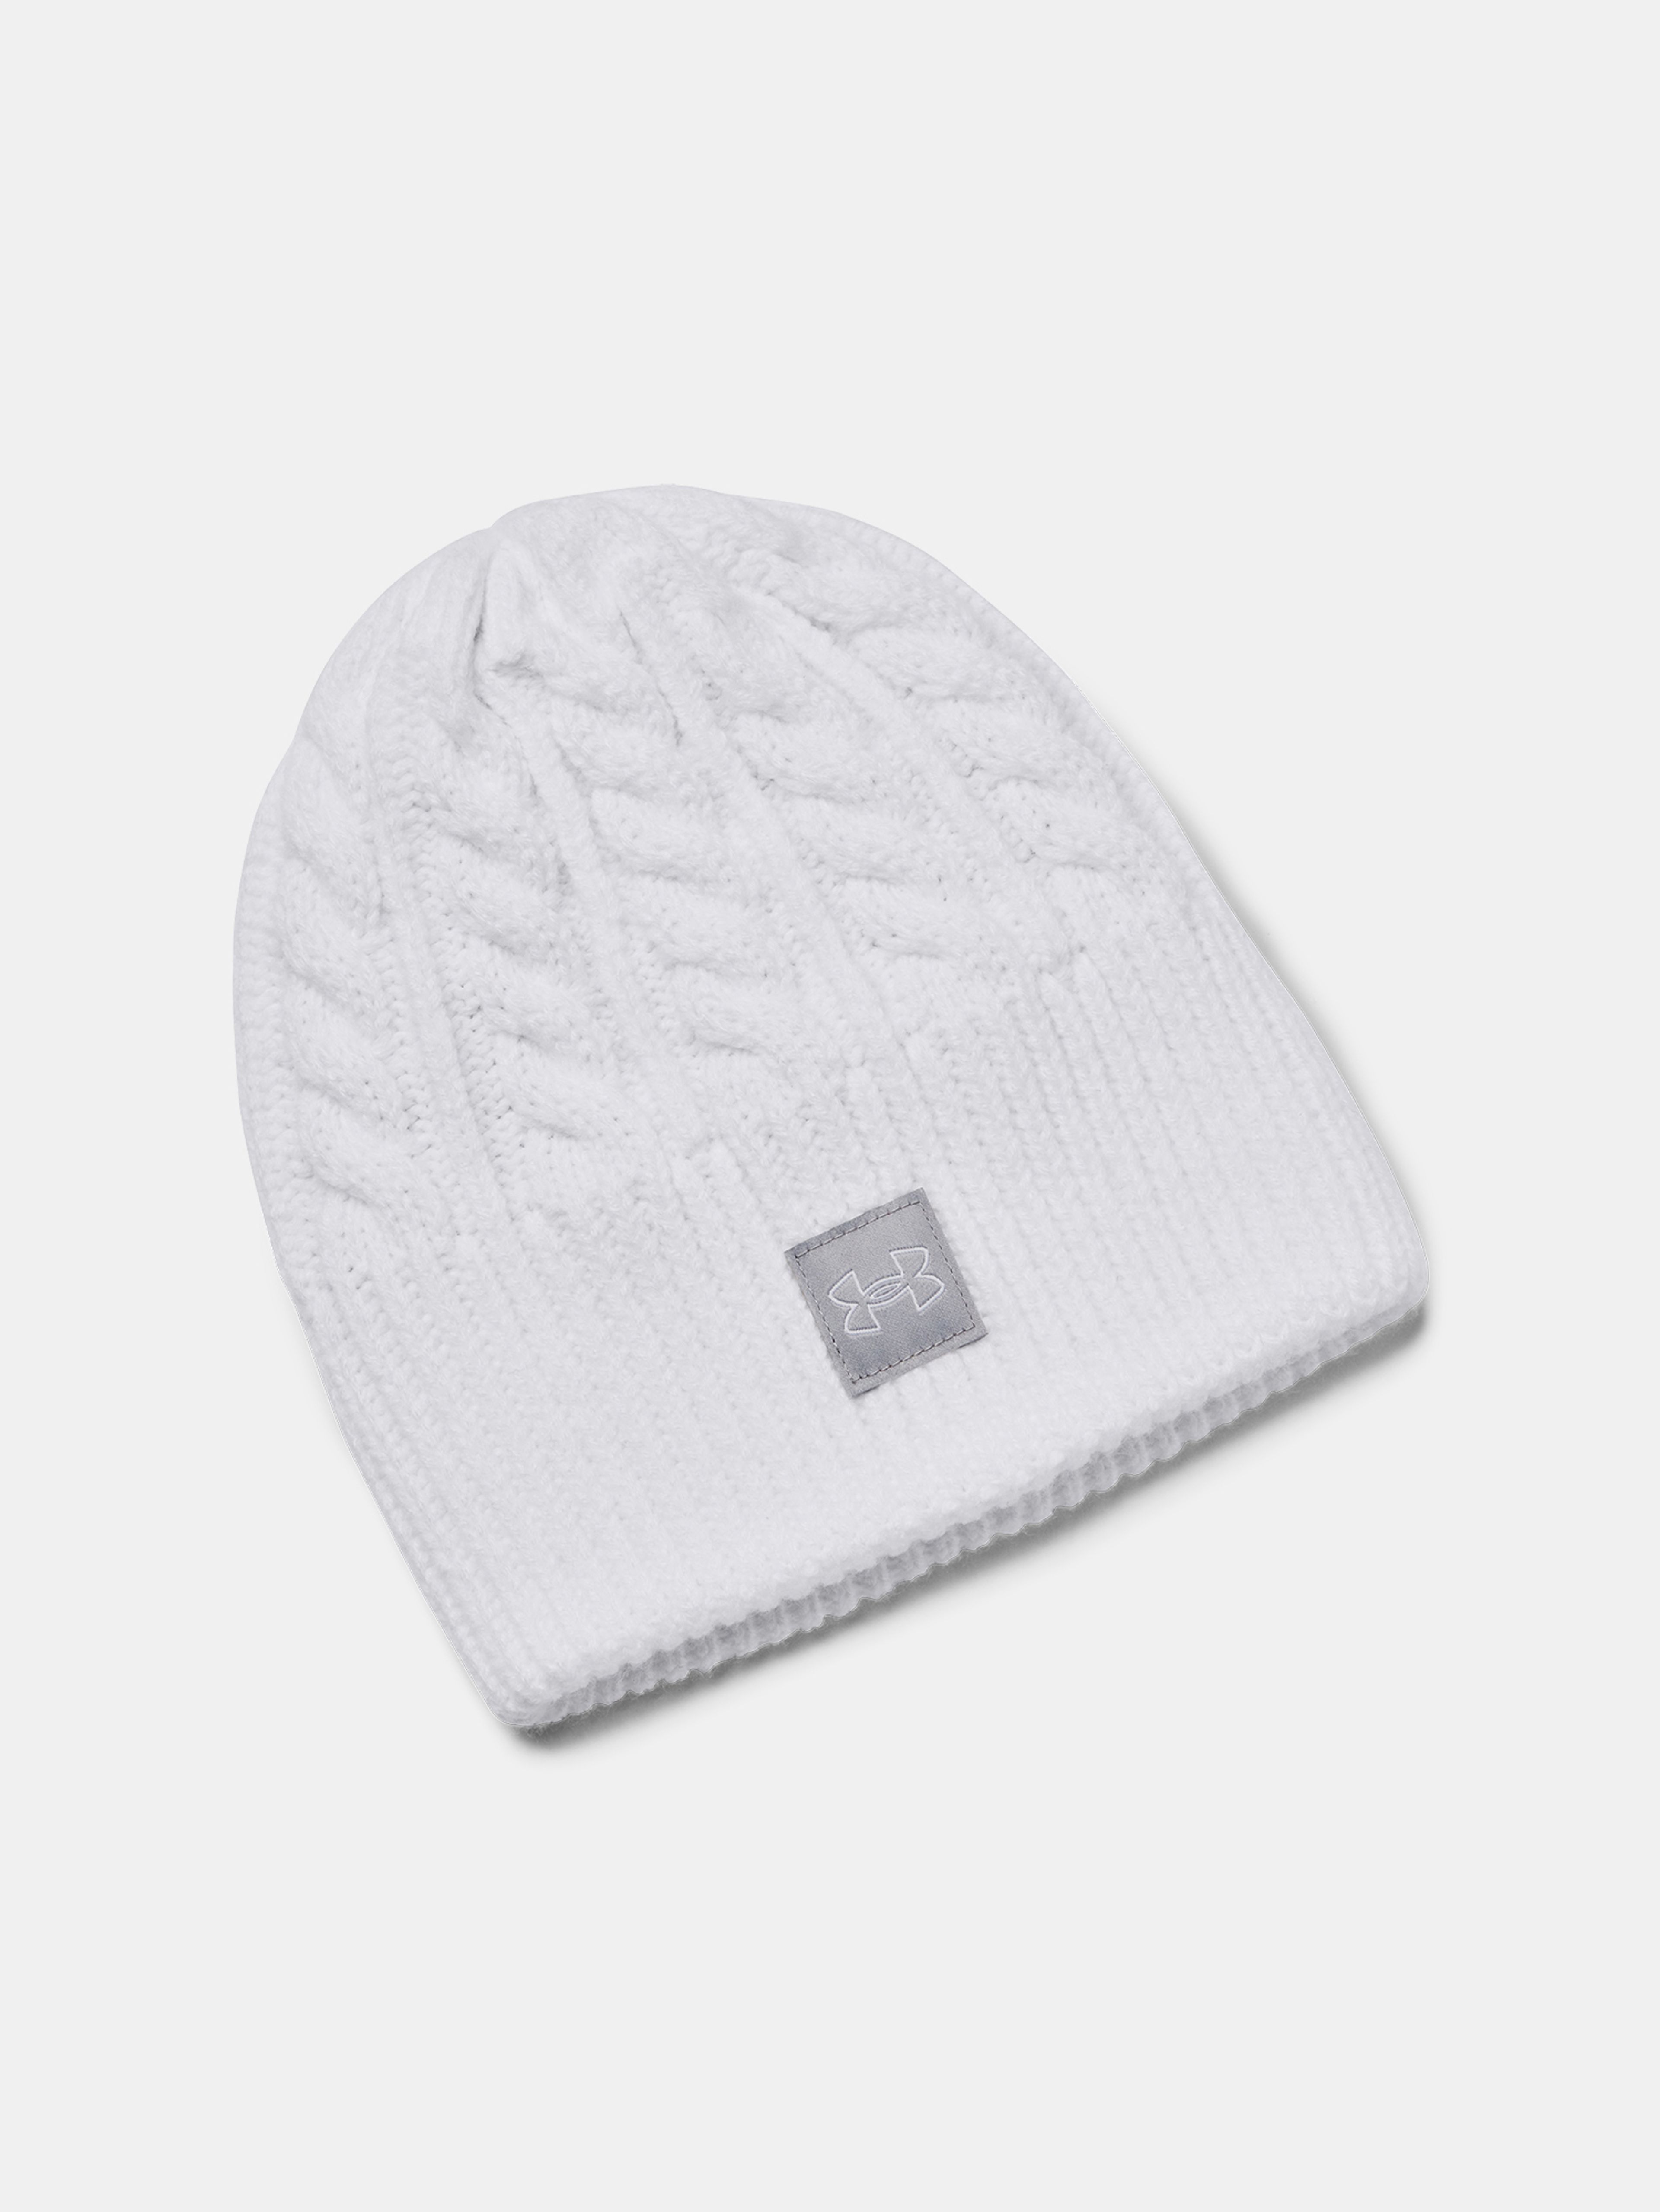 Kapa Under Armour Halftime Cable Knit Beanie-WHT